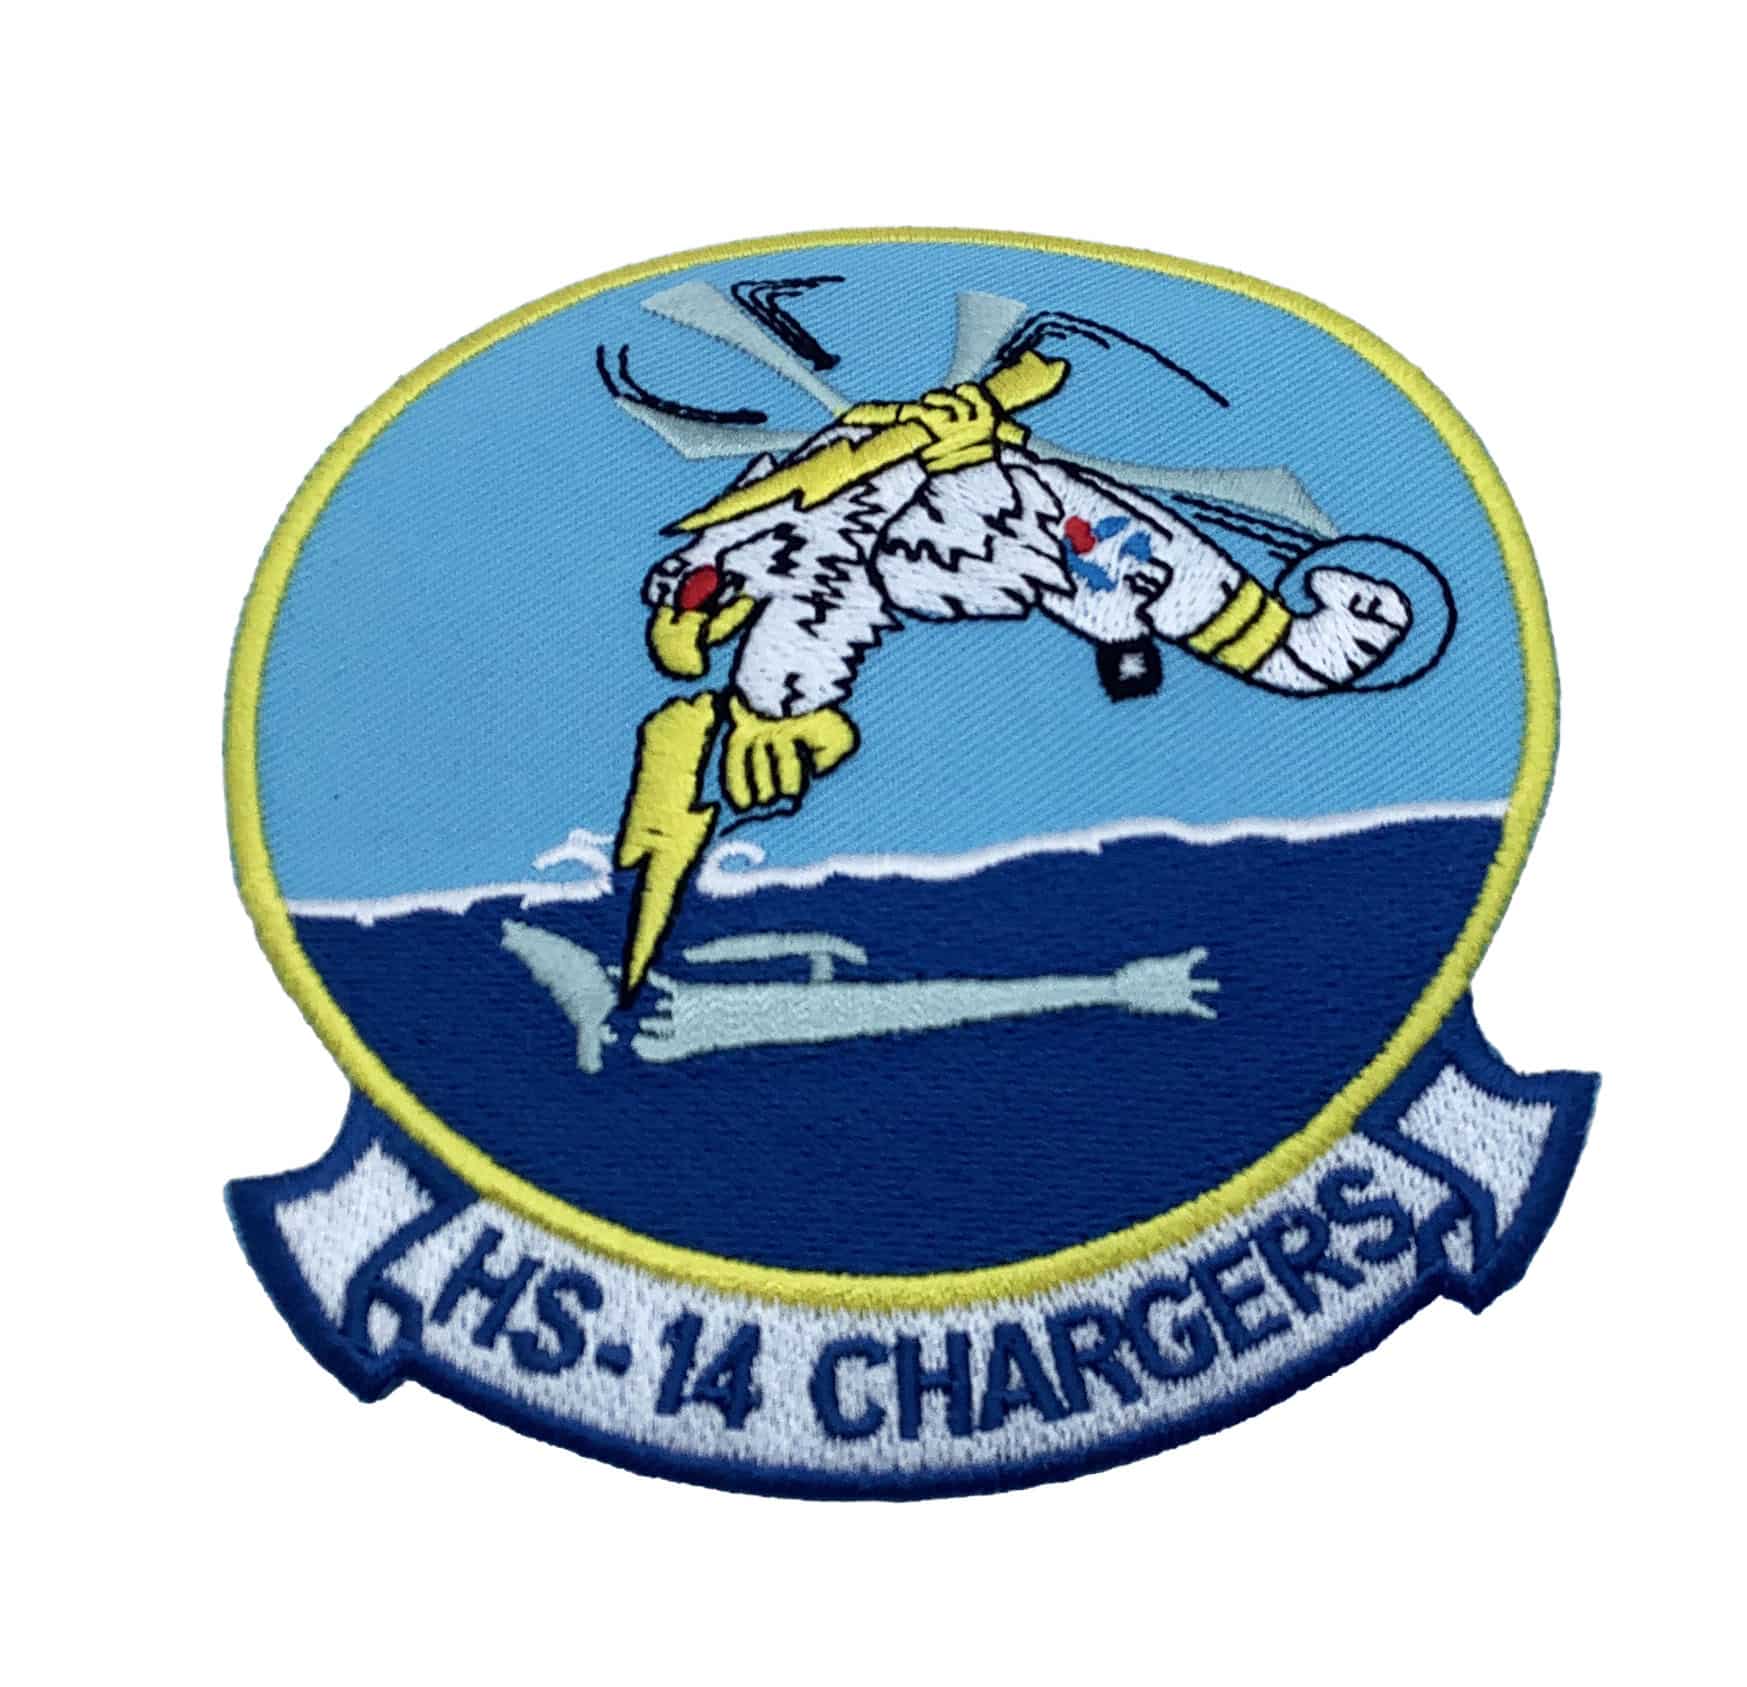 HS-14 Chargers Patch - Plastic Backing